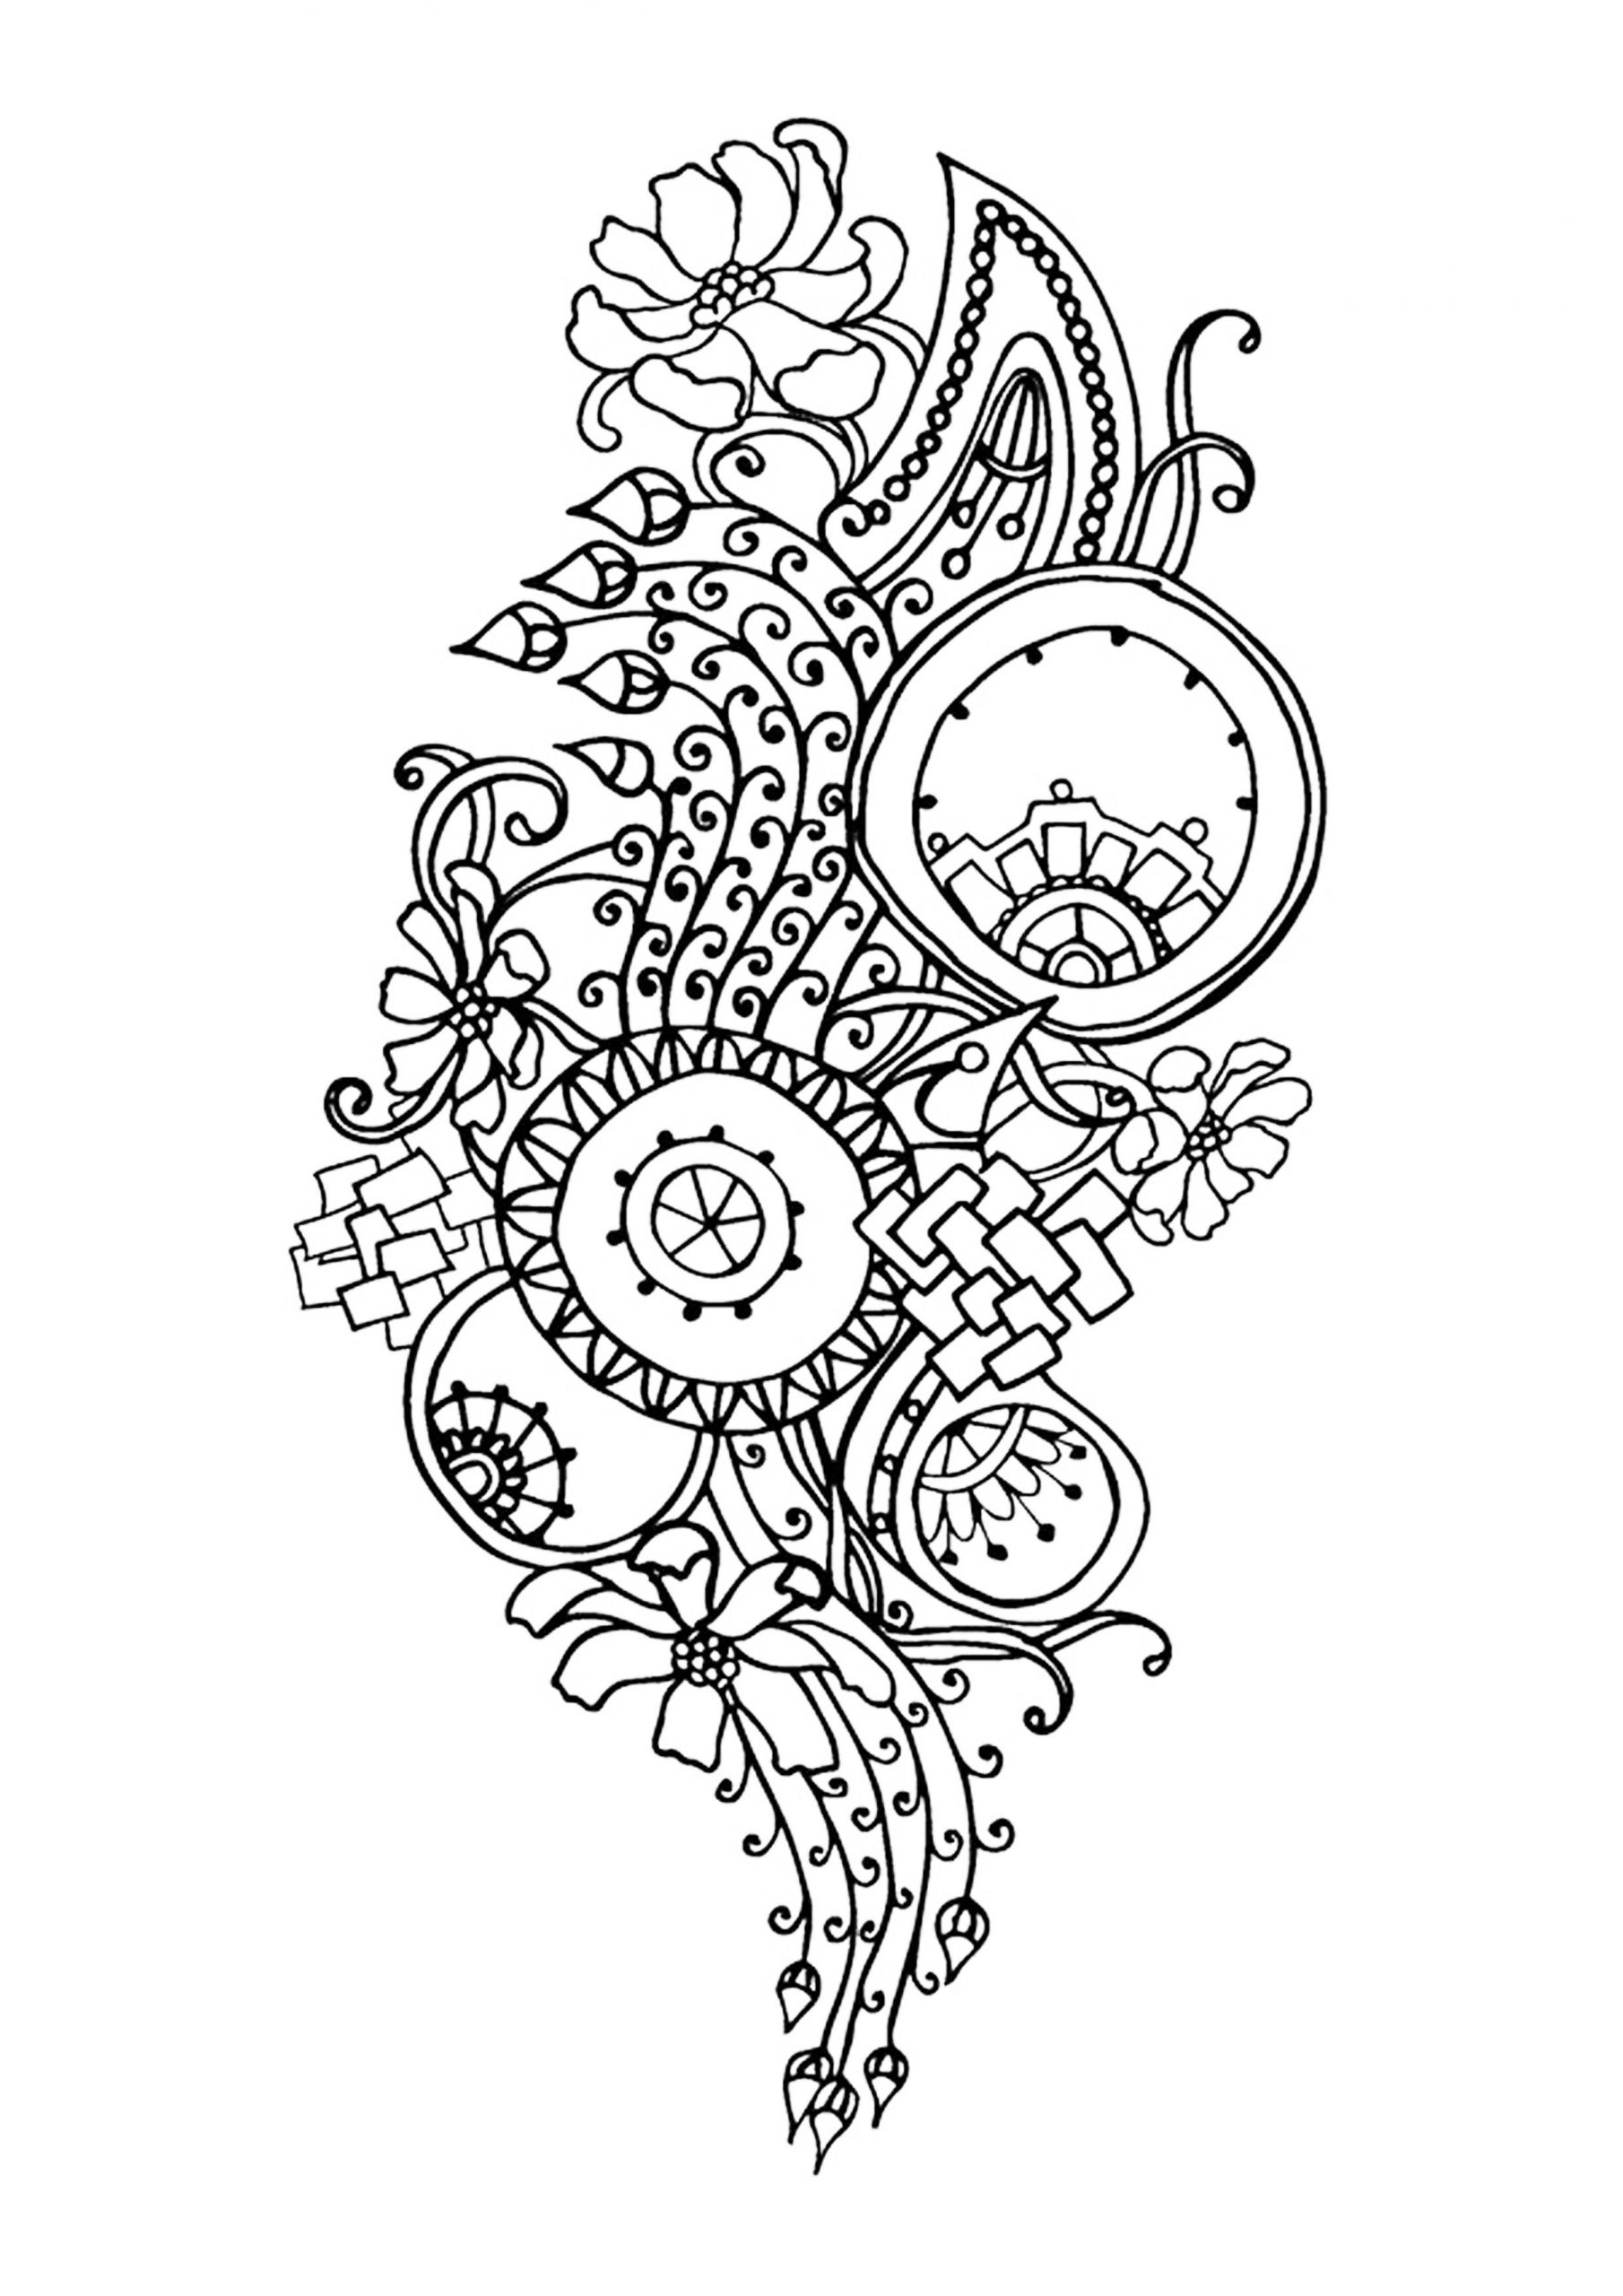 Coloring Pages For Adults Abstract Flowers
 Flower Coloring Pages for Adults Best Coloring Pages For